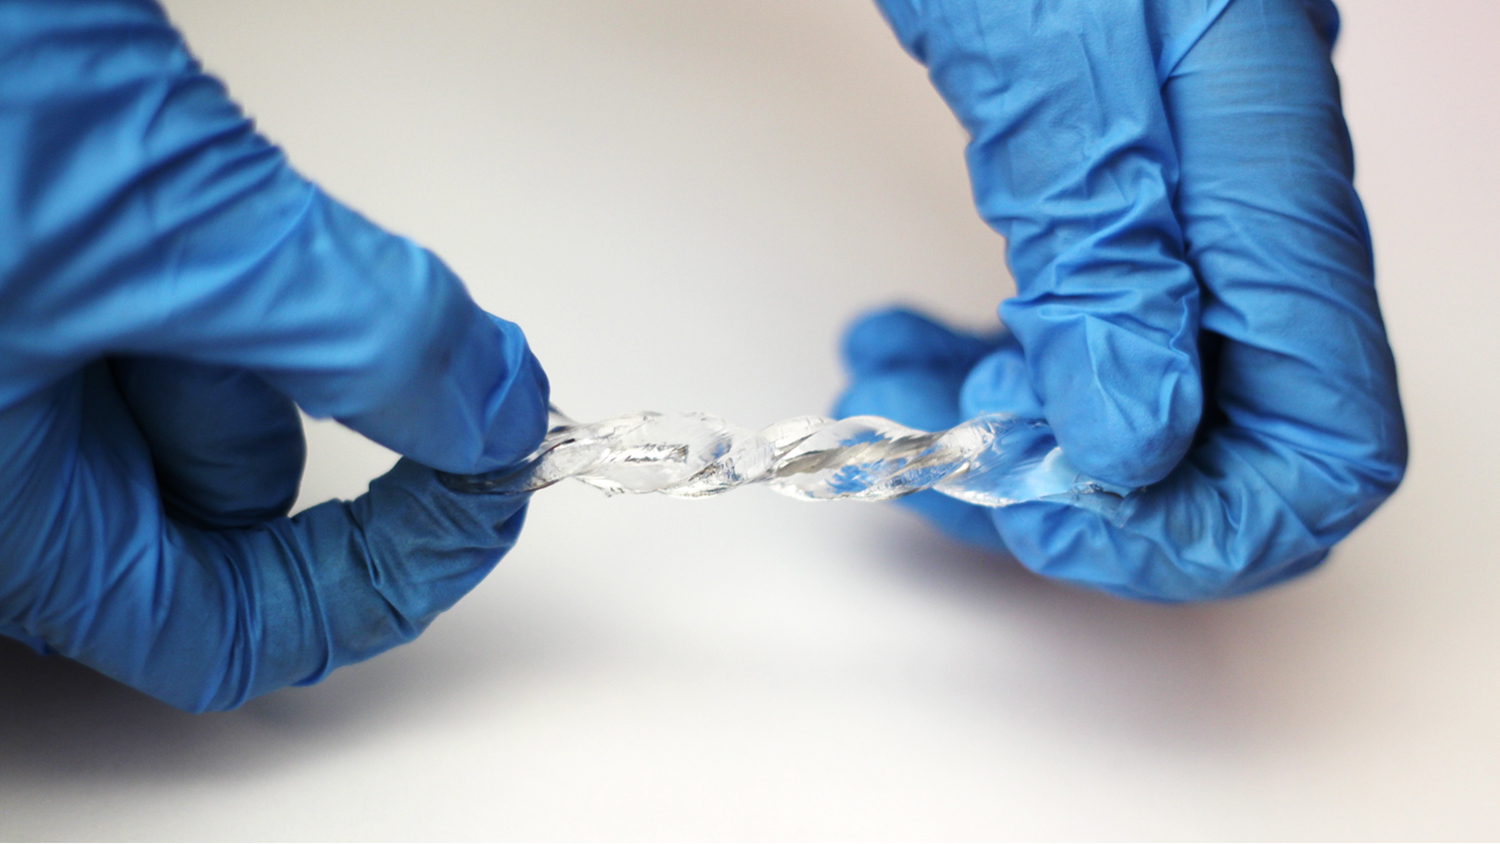 Latex-gloved hands holding a clear hydrogel.